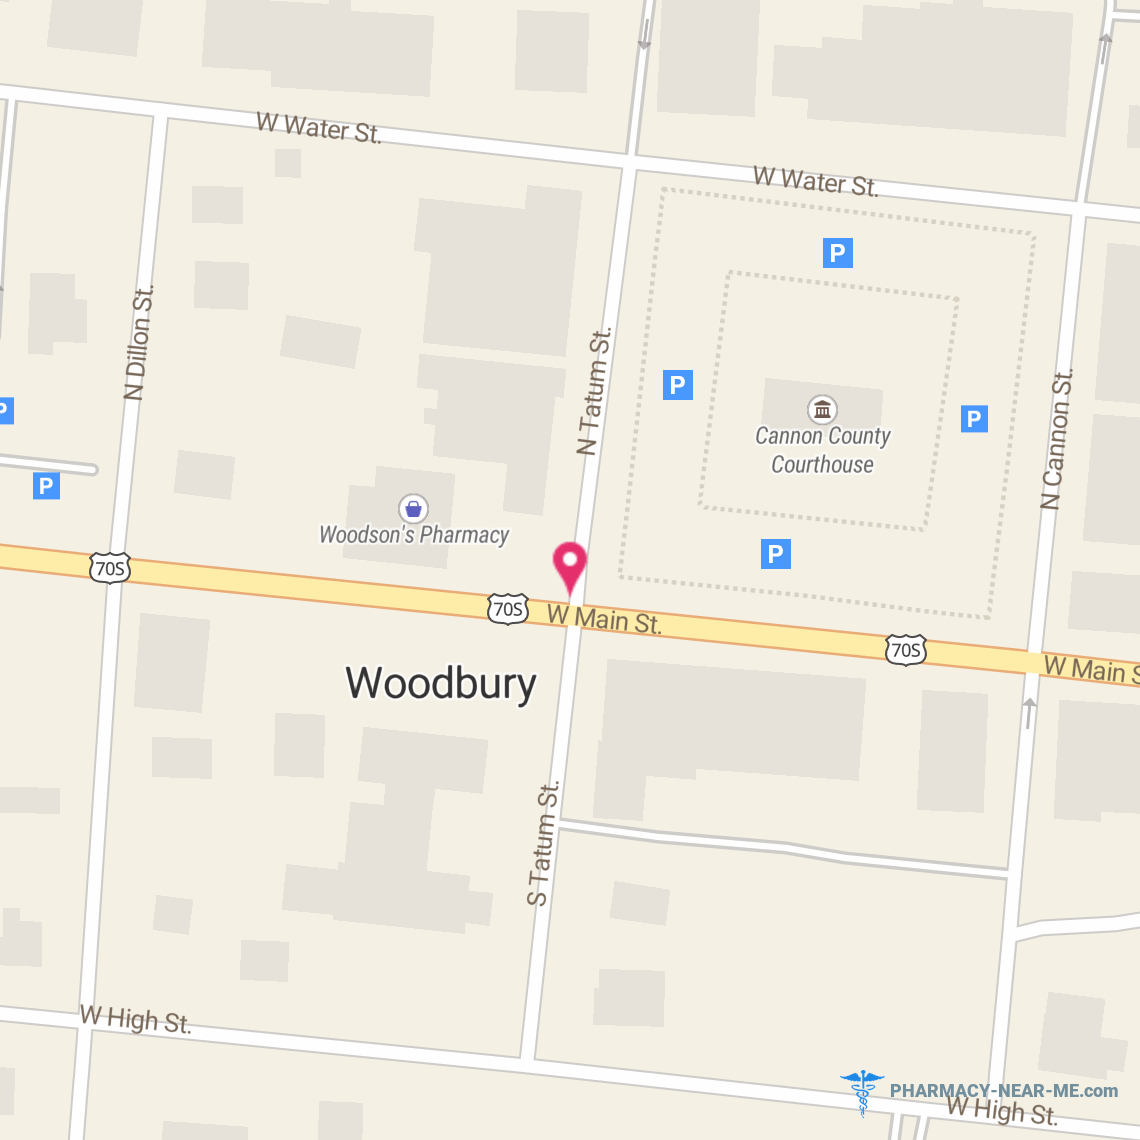 WOODSON'S PHARMACY, INC. - Pharmacy Hours, Phone, Reviews & Information: 304 West Main Street, Woodbury, Tennessee 37190, United States